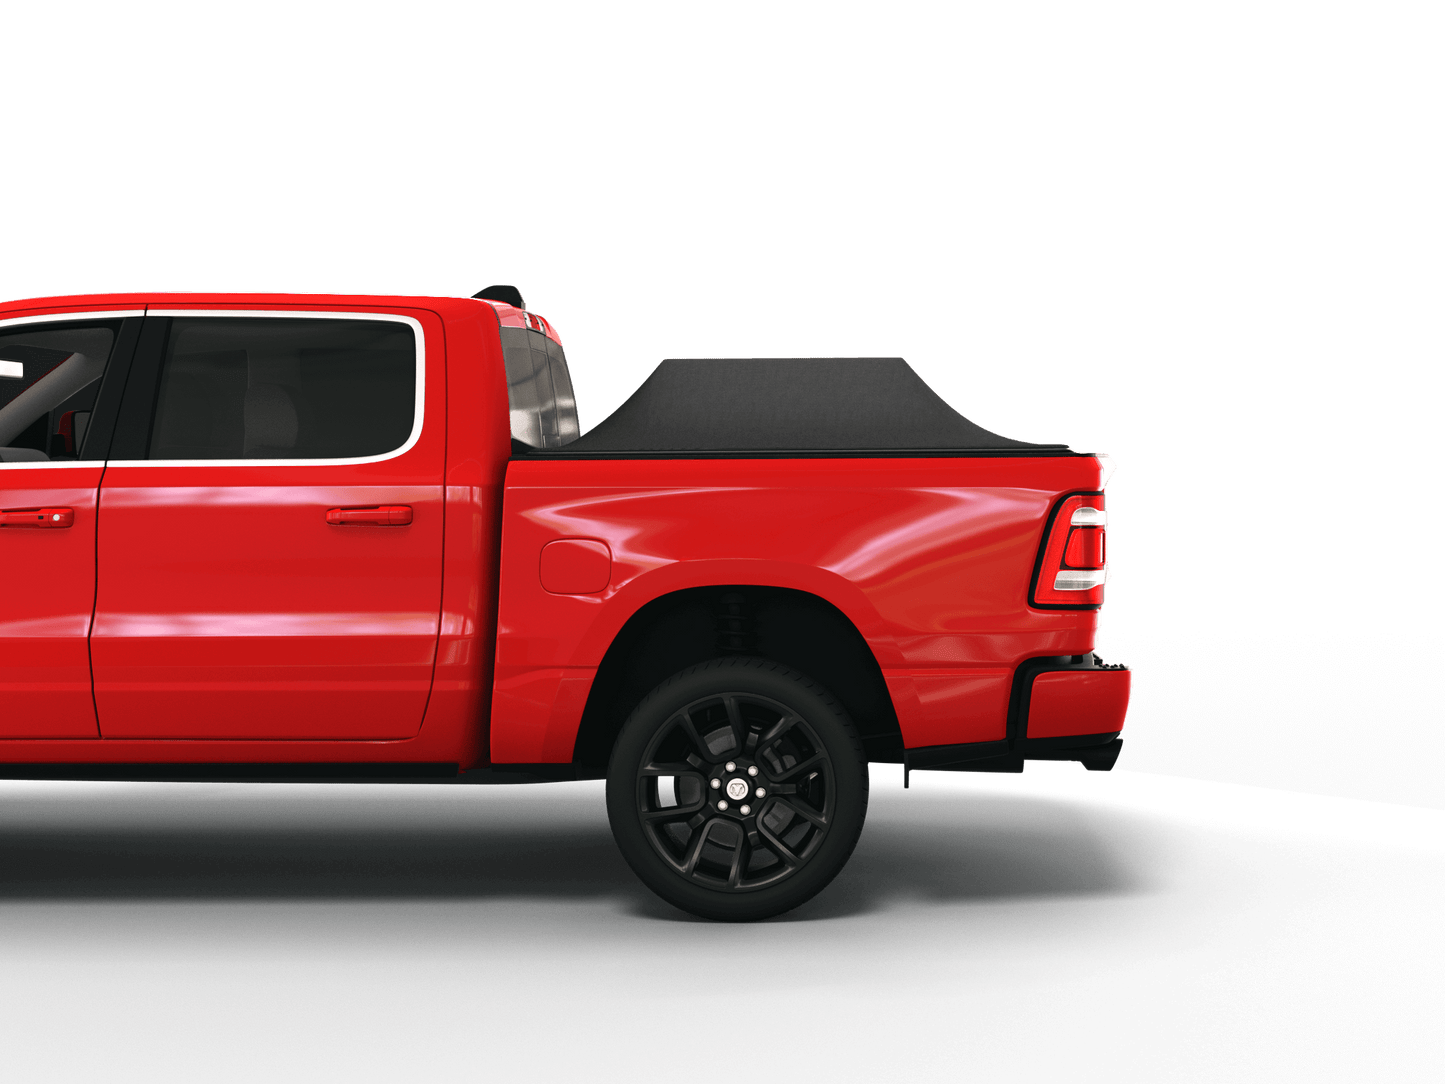 Red Ram 1500 with Sawtooth Stretch tonneau cover expanded over cargo load